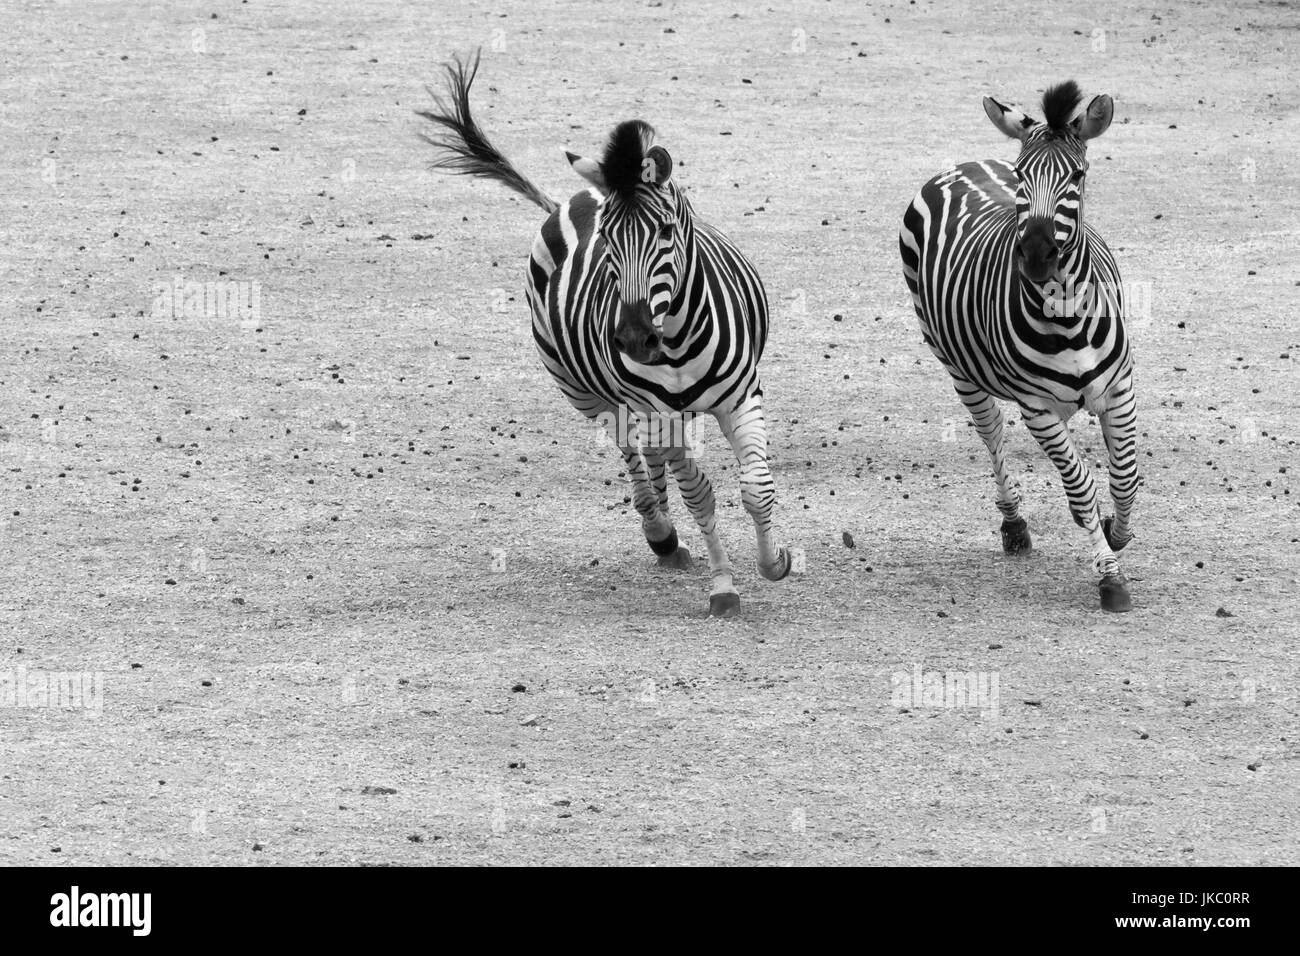 Galloping zebras in black and white. Pair of plains zebra (Equus quagga) running side by side Stock Photo